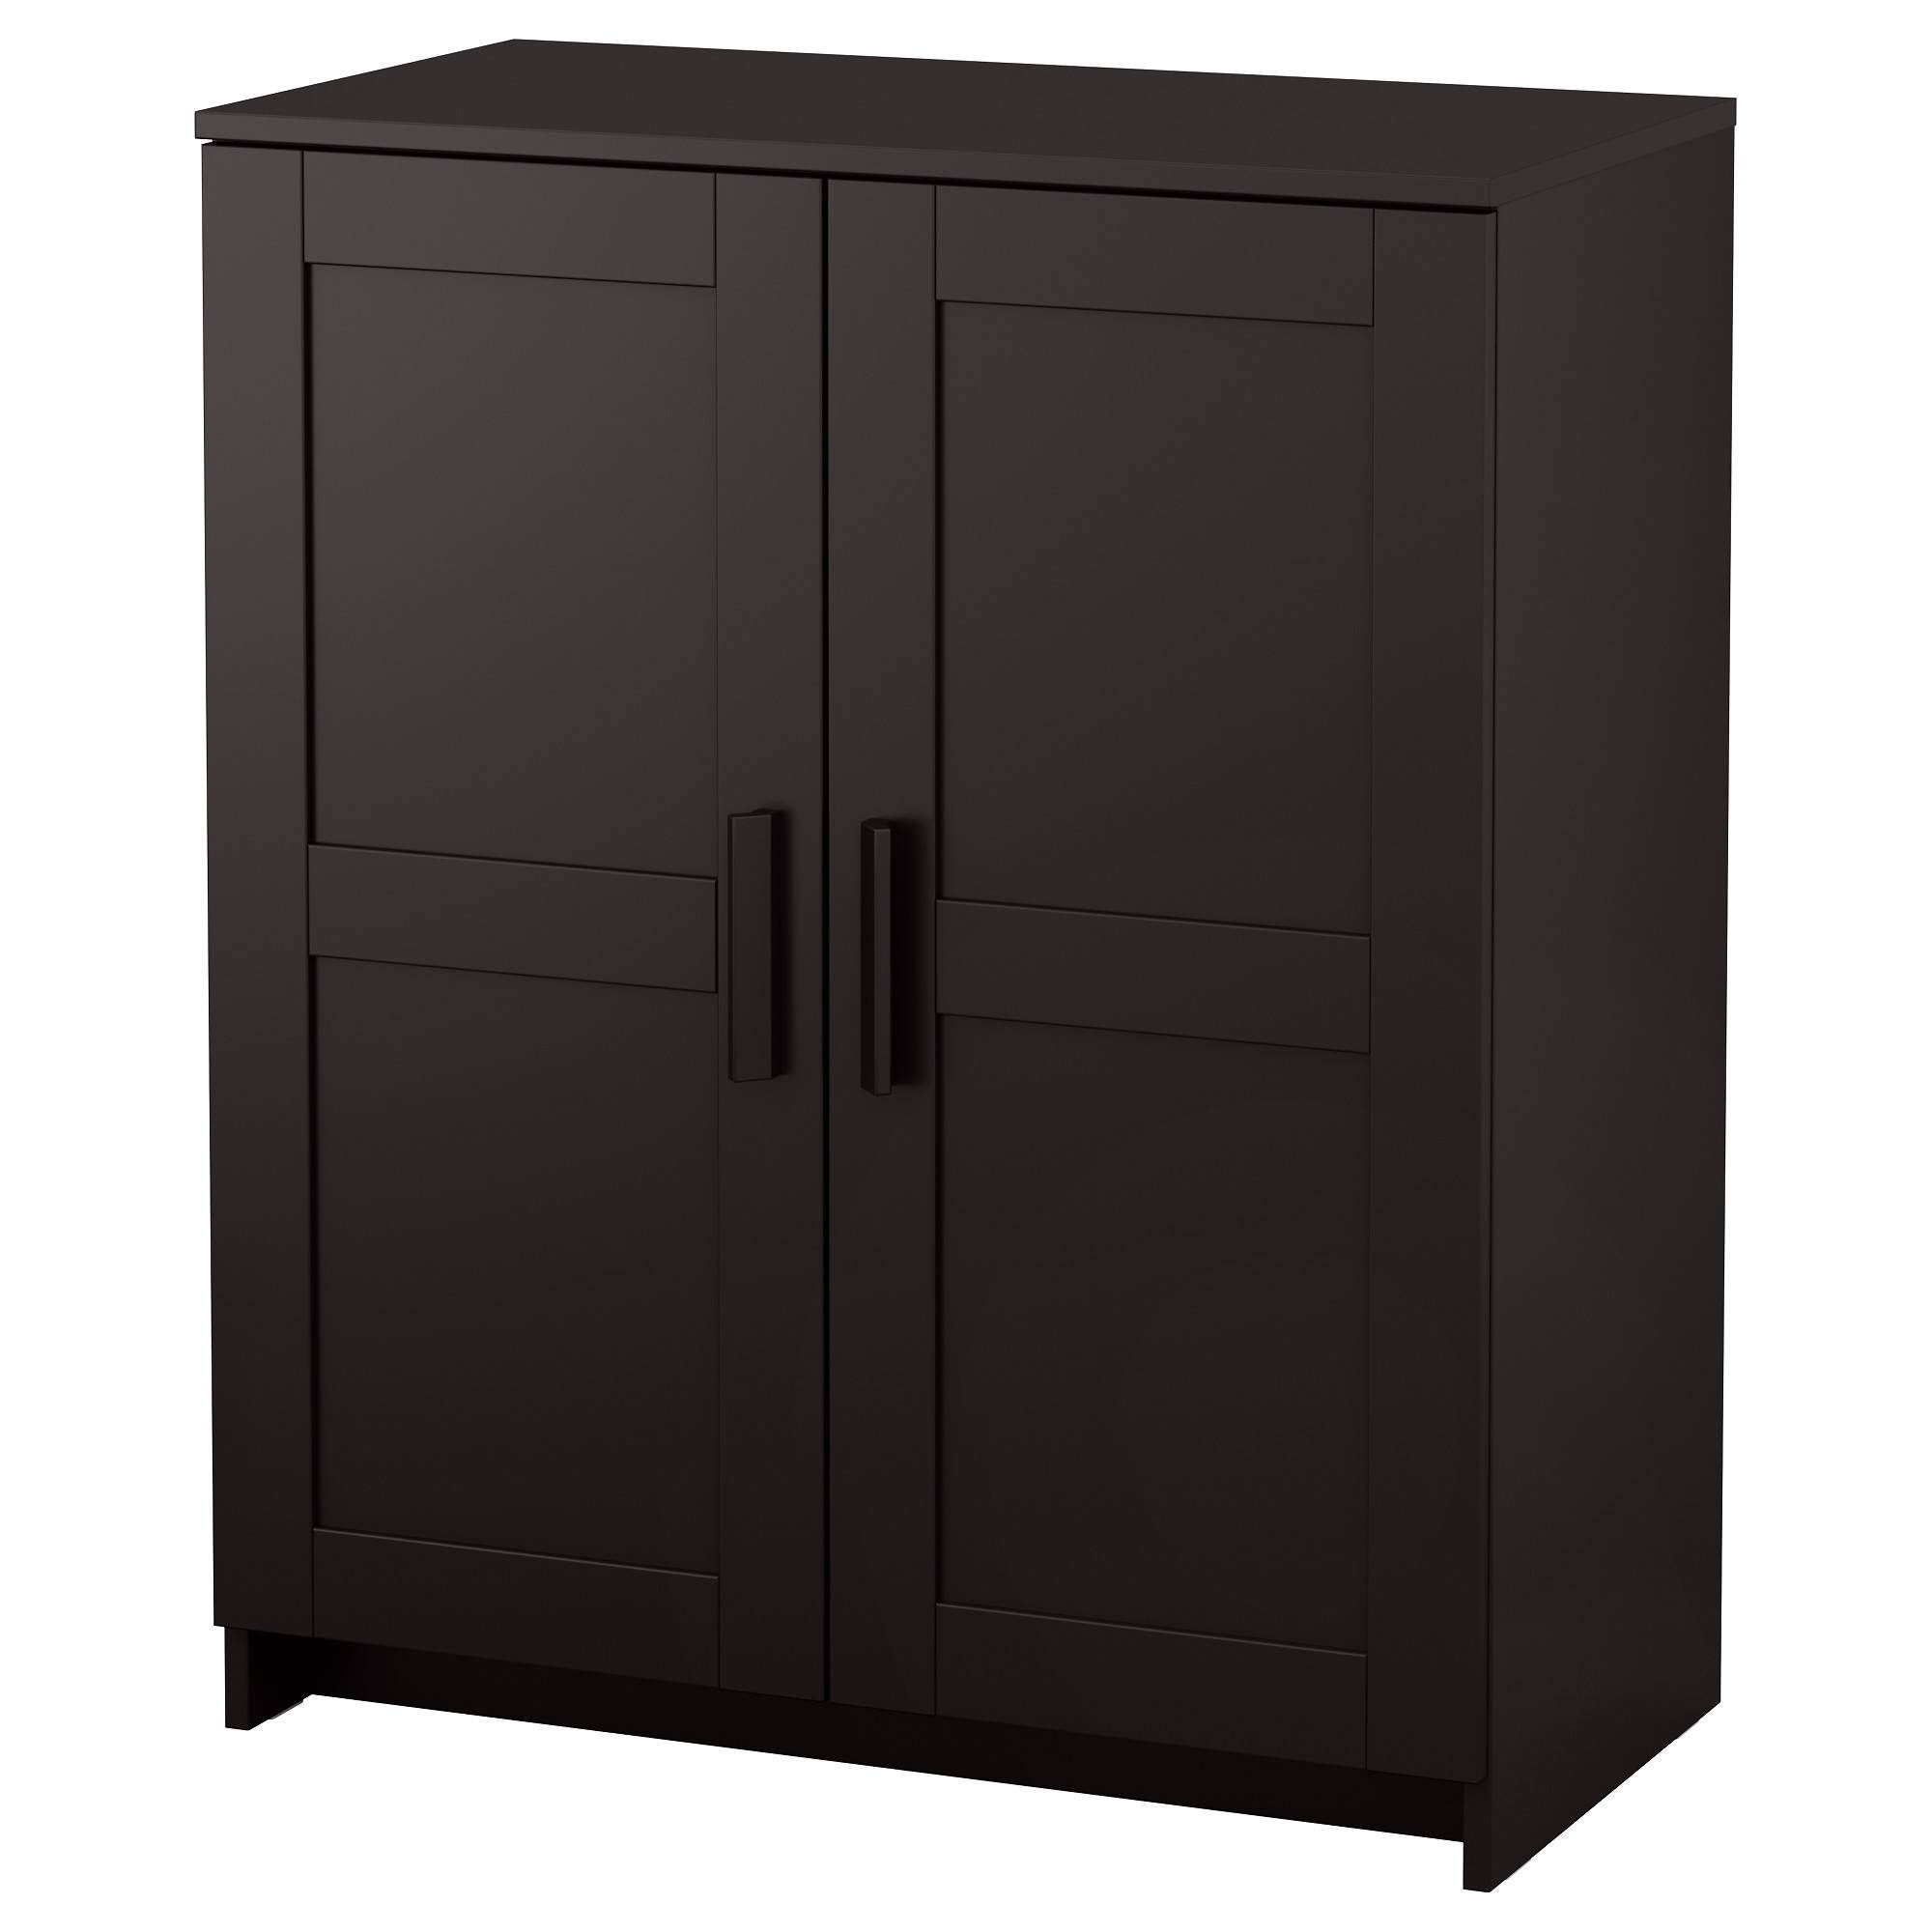 Cabinets & Sideboards – Ikea With Small Sideboards Cabinets (View 9 of 20)